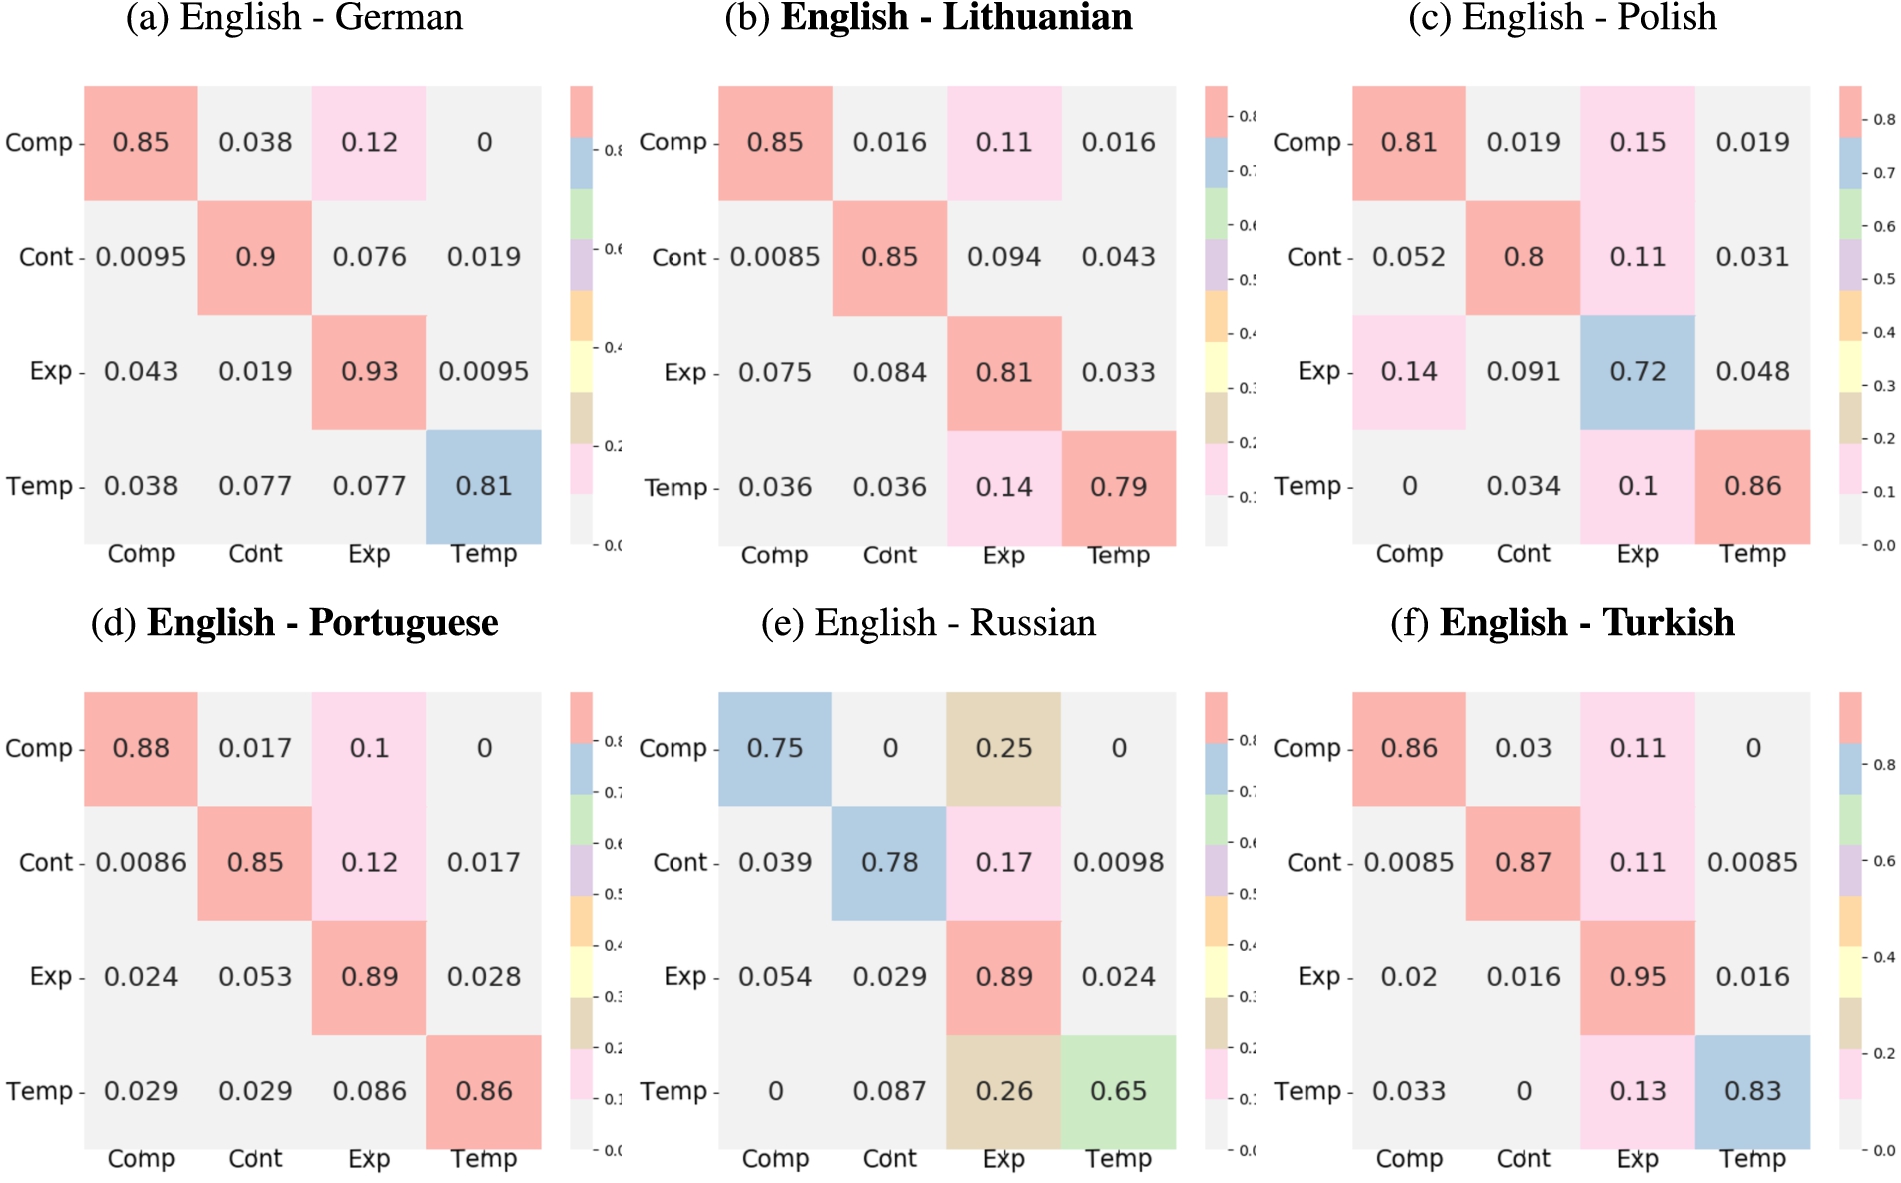 Heatmap visualizations of the confusion matrices for the sense of linked discourse relations. Rows correspond to the English relations and columns denote target languages. The matrices are normalized row-wise, where each cell denotes the percentage of English relations converted to the respective label in the target language. Confusion matrices created from manually-corrected links are highlighted in bold.